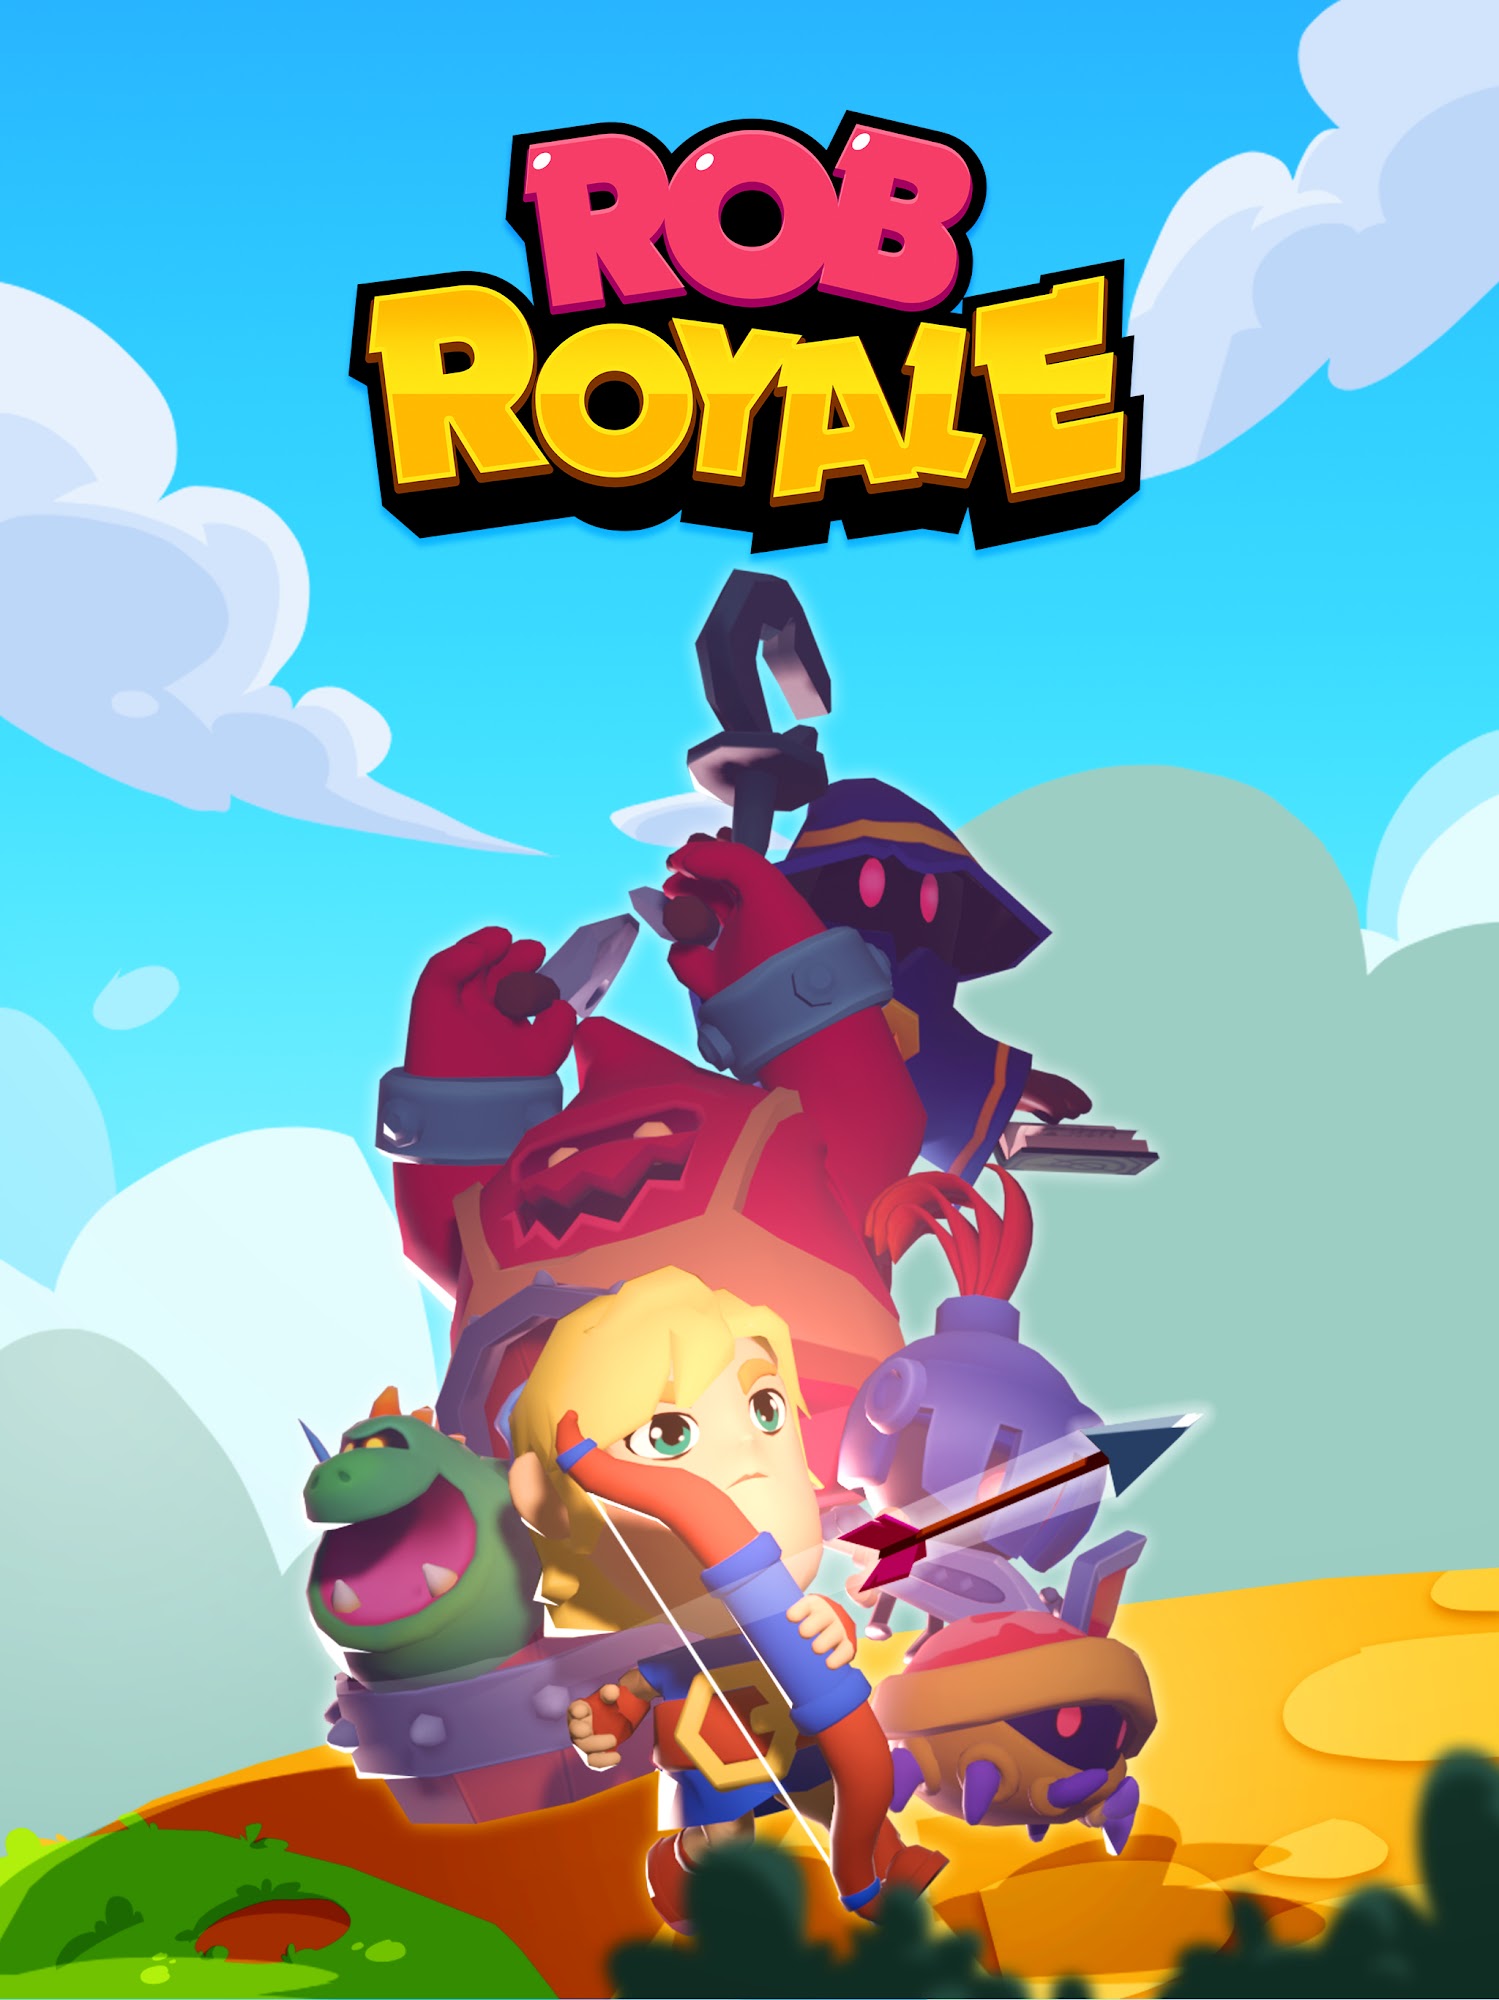 Rob Royale for Android